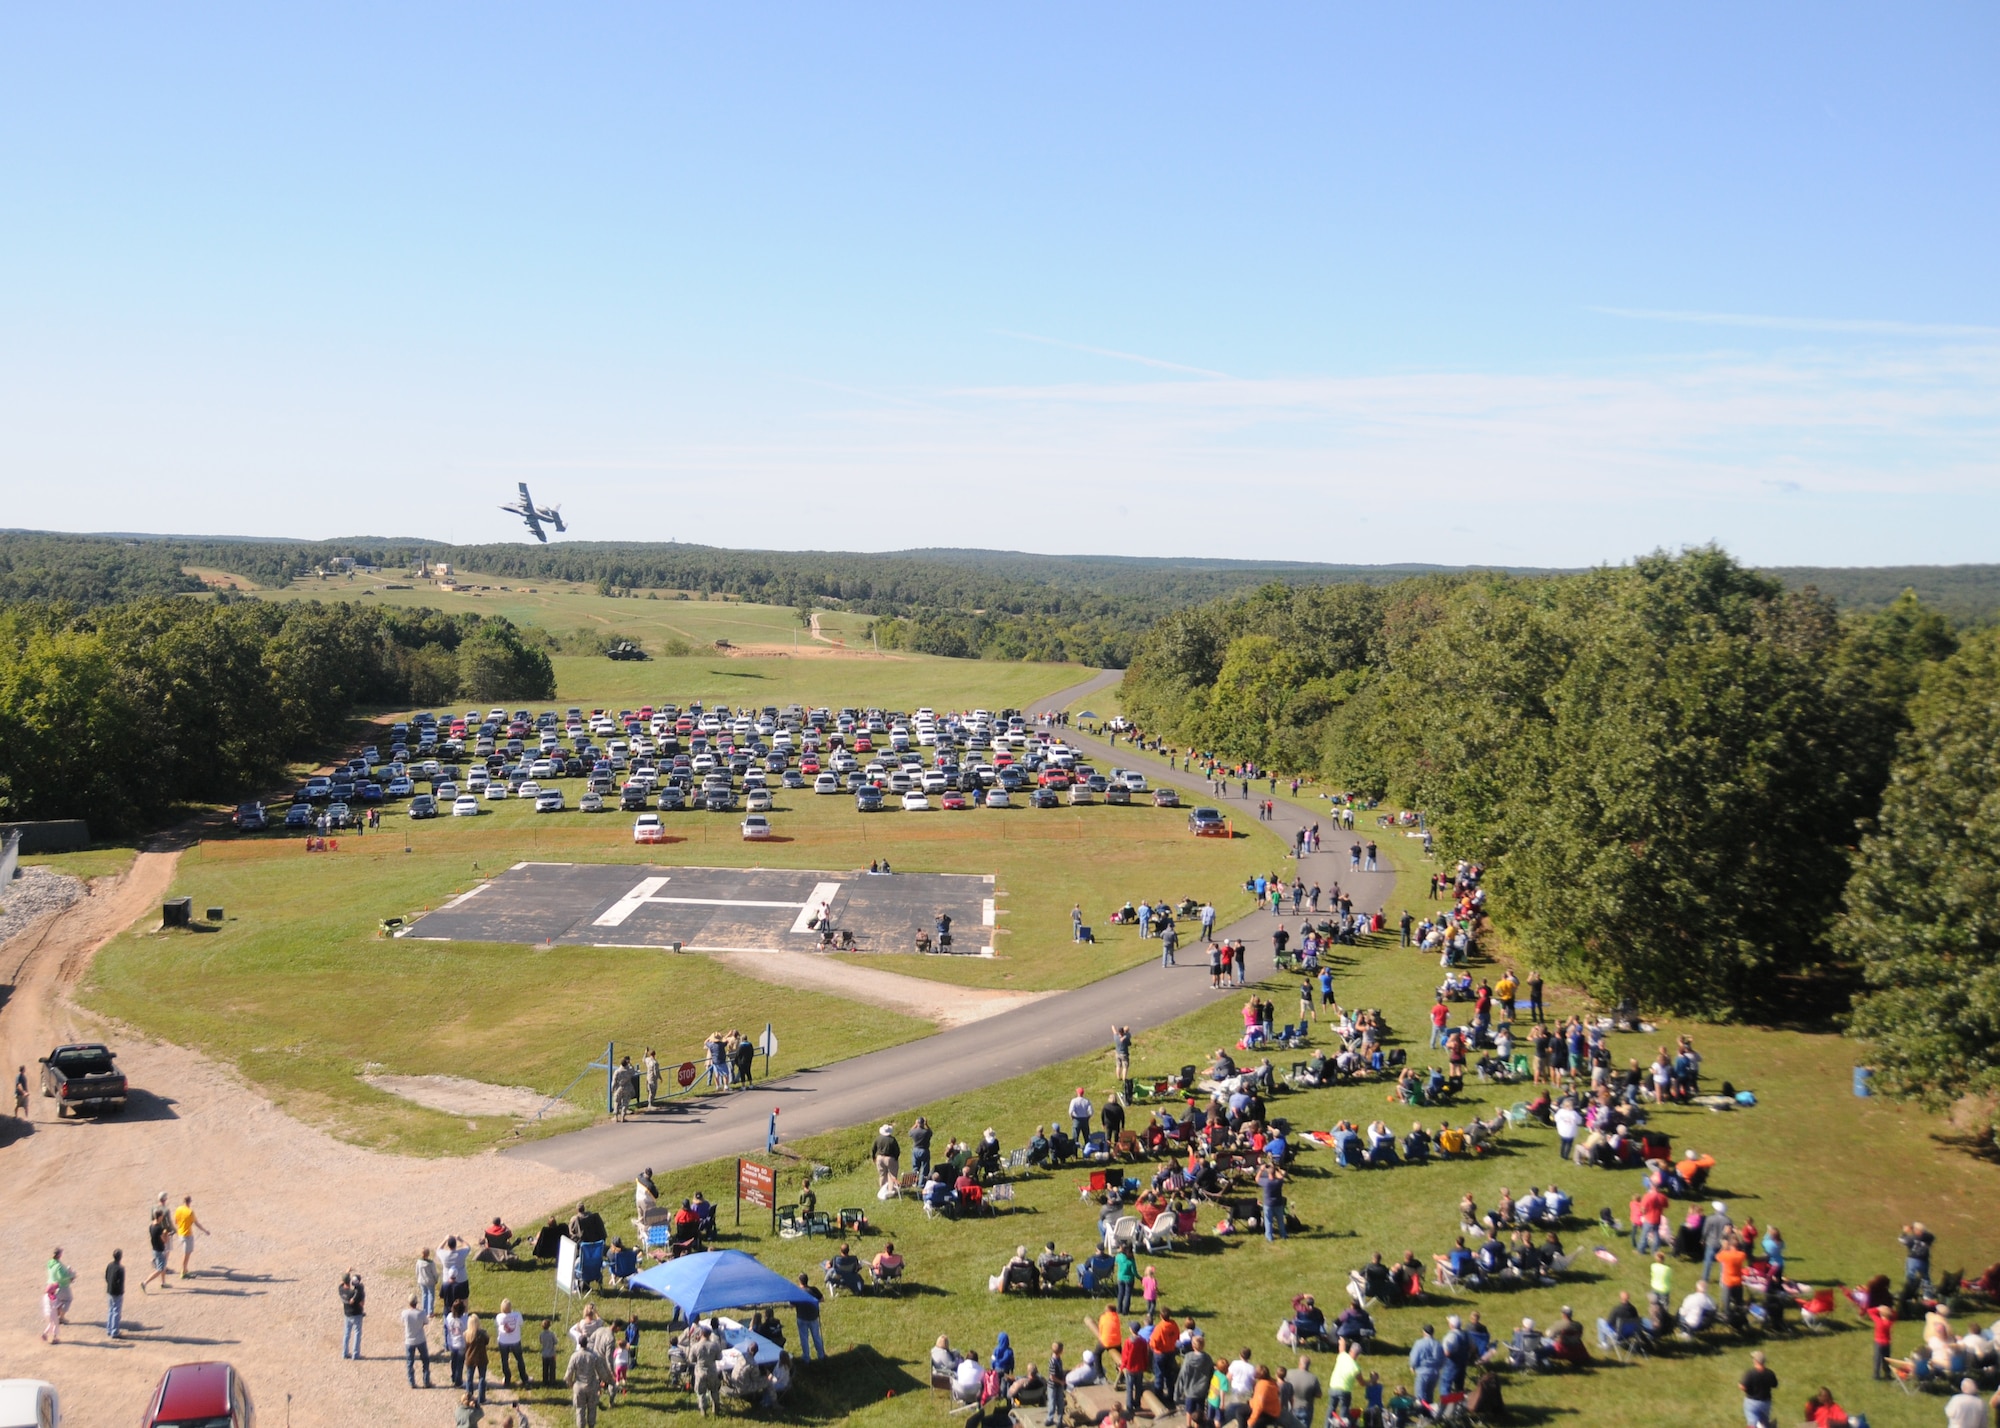 Central Missouri community members watch as A-10 fighter aircraft of the 442nd Fighter Wing fly over an outreach event hosted by the Missouri Air National Guard’s 131st Bomb Wing, Detachment 1 - Cannon Range, near Laquey, Missouri, Sept. 12, 2015.  More than 850 guests participated in the family-friendly event that included munitions demonstrations by the B-2 Spirit stealth bomber, A-10 Thunderbolt II attack aircraft, and  C-130 Hercules transport. (U.S. Air National Guard photo by Senior Airman Nathan Dampf)